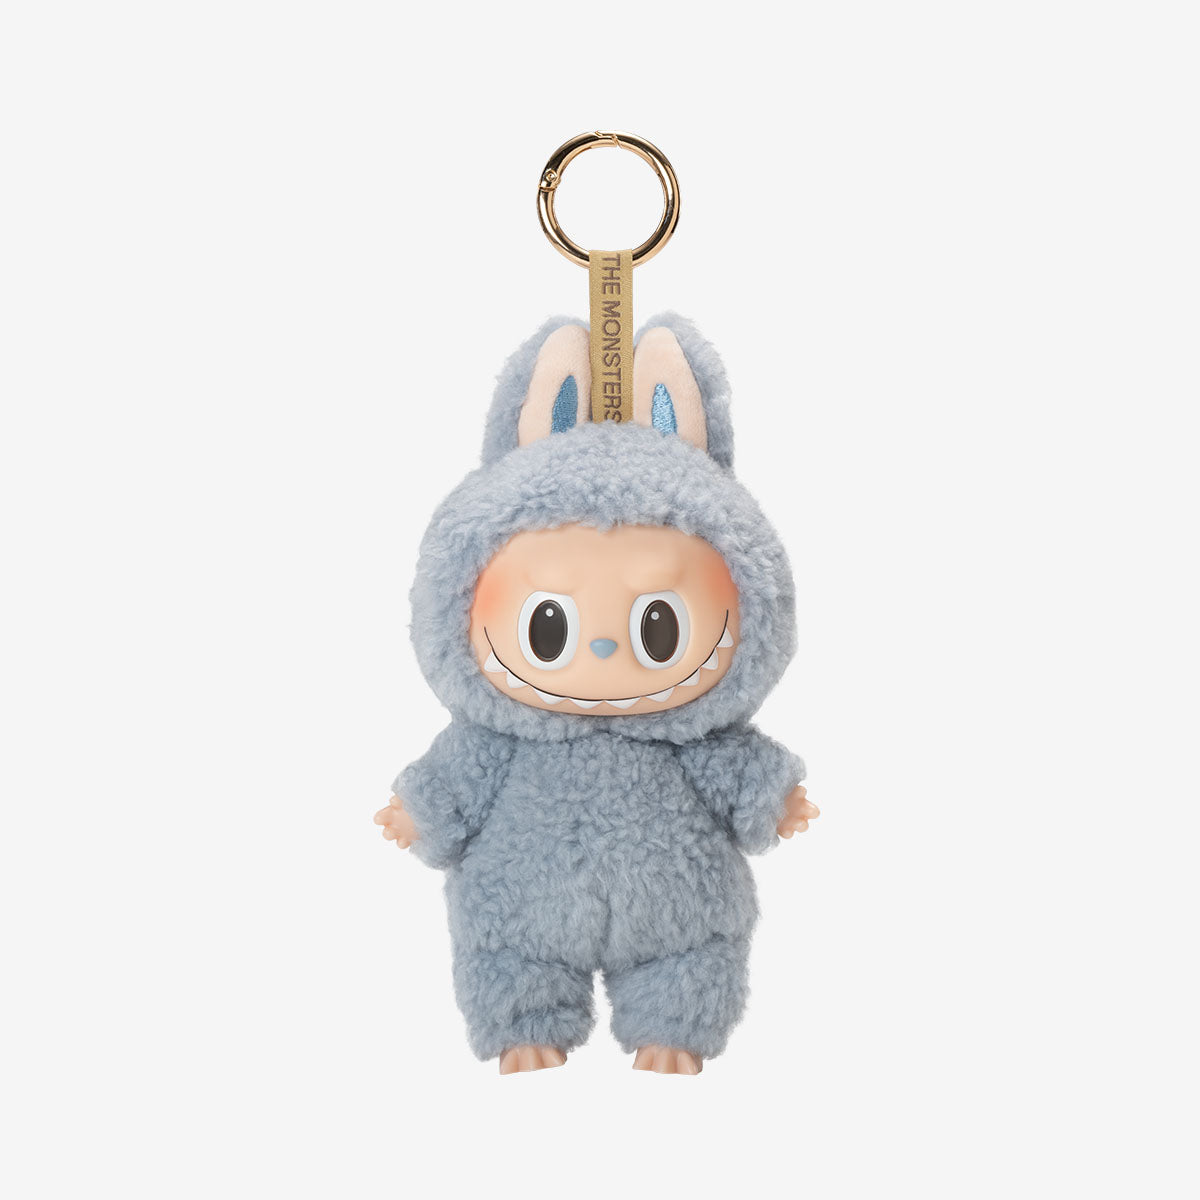 The Monsters Exciting Macaron Series Plush Pendant Keychain – Top 